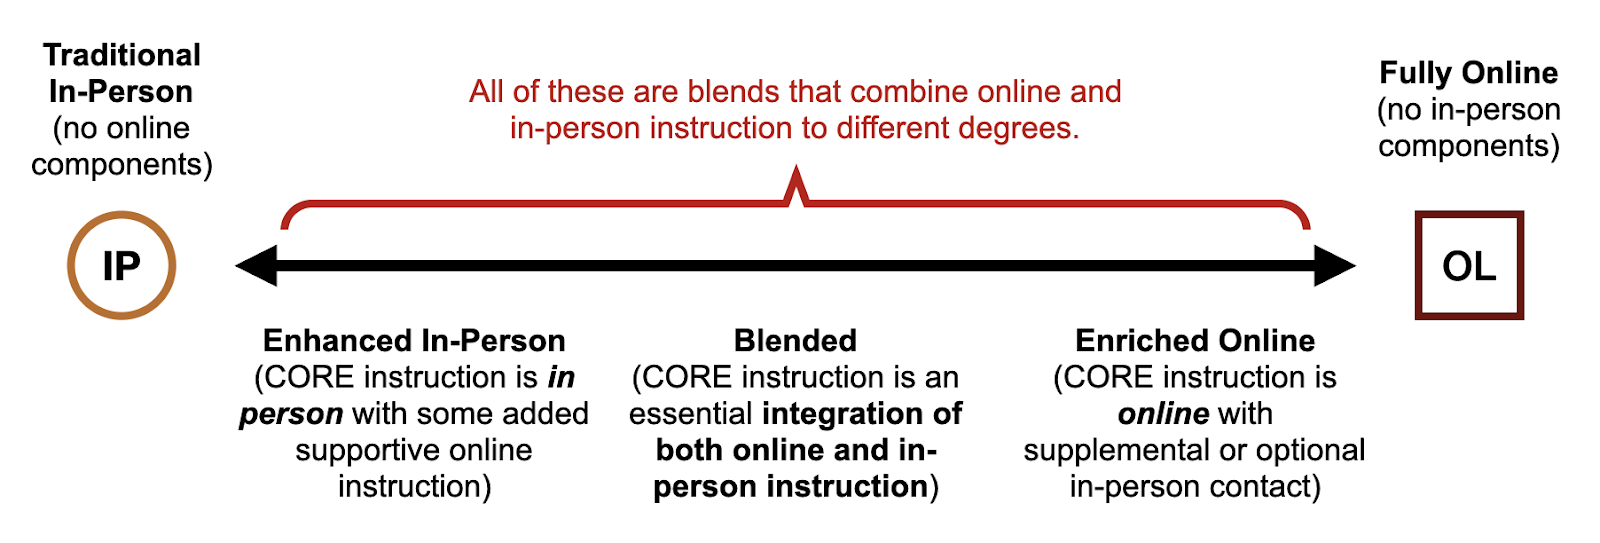 Range of instructional blends from fully in person to enhanced in person to blended to enriched online to fully online